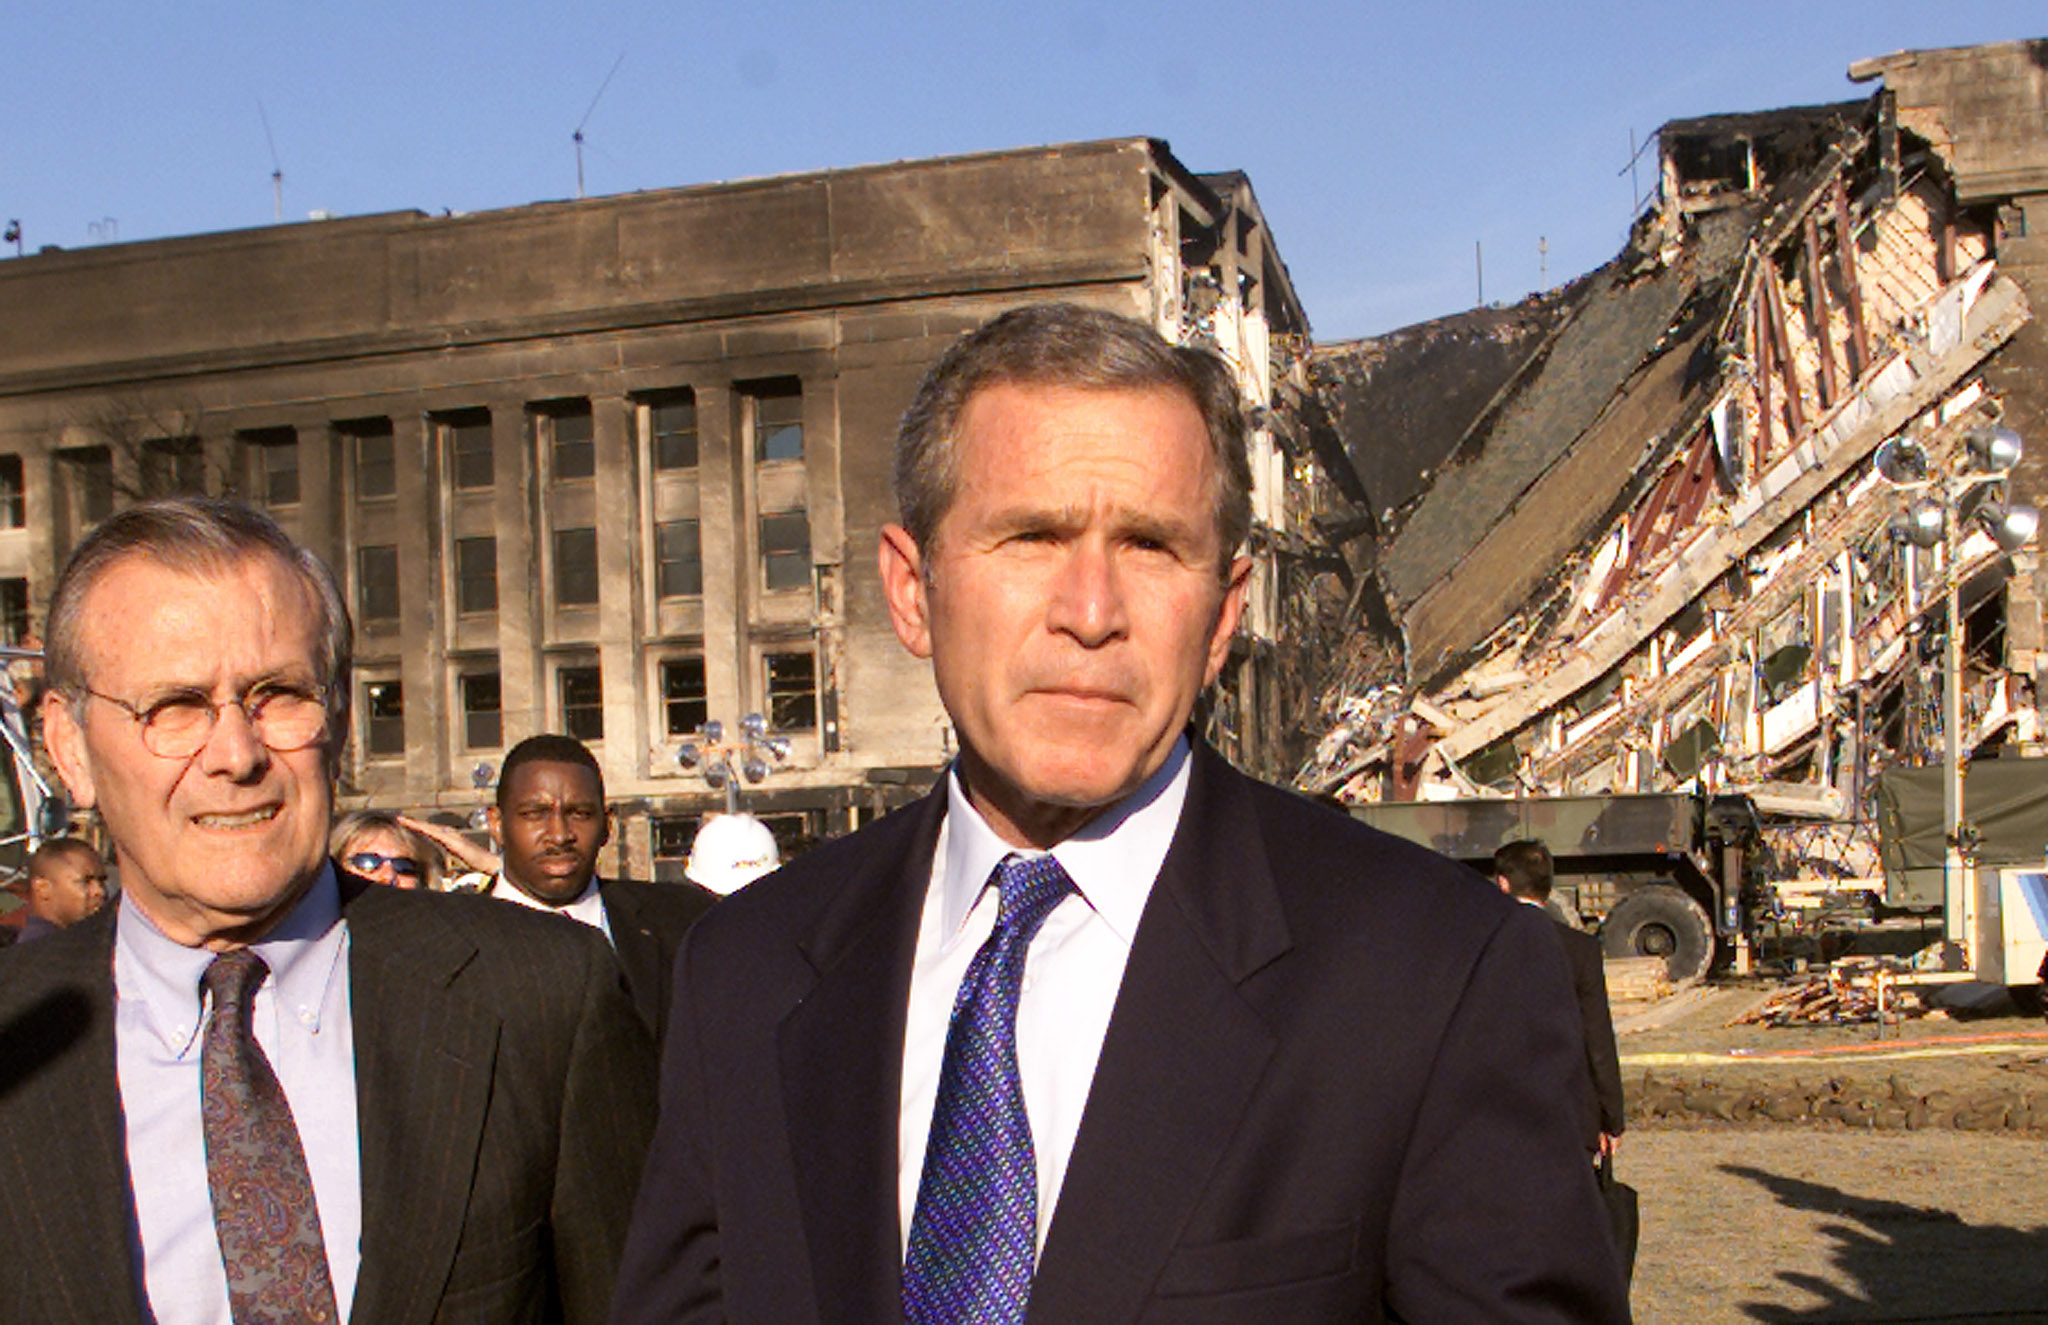 Secretary of Defense Donald Rumsfeld and President George W. Bush speak in front of the west side of the Pentagon September 12, 2001 -- the same spot where terrorists plunged an airliner earlier the day before. (Photo: REUTERS/Kevin Lamarque/Newscom)